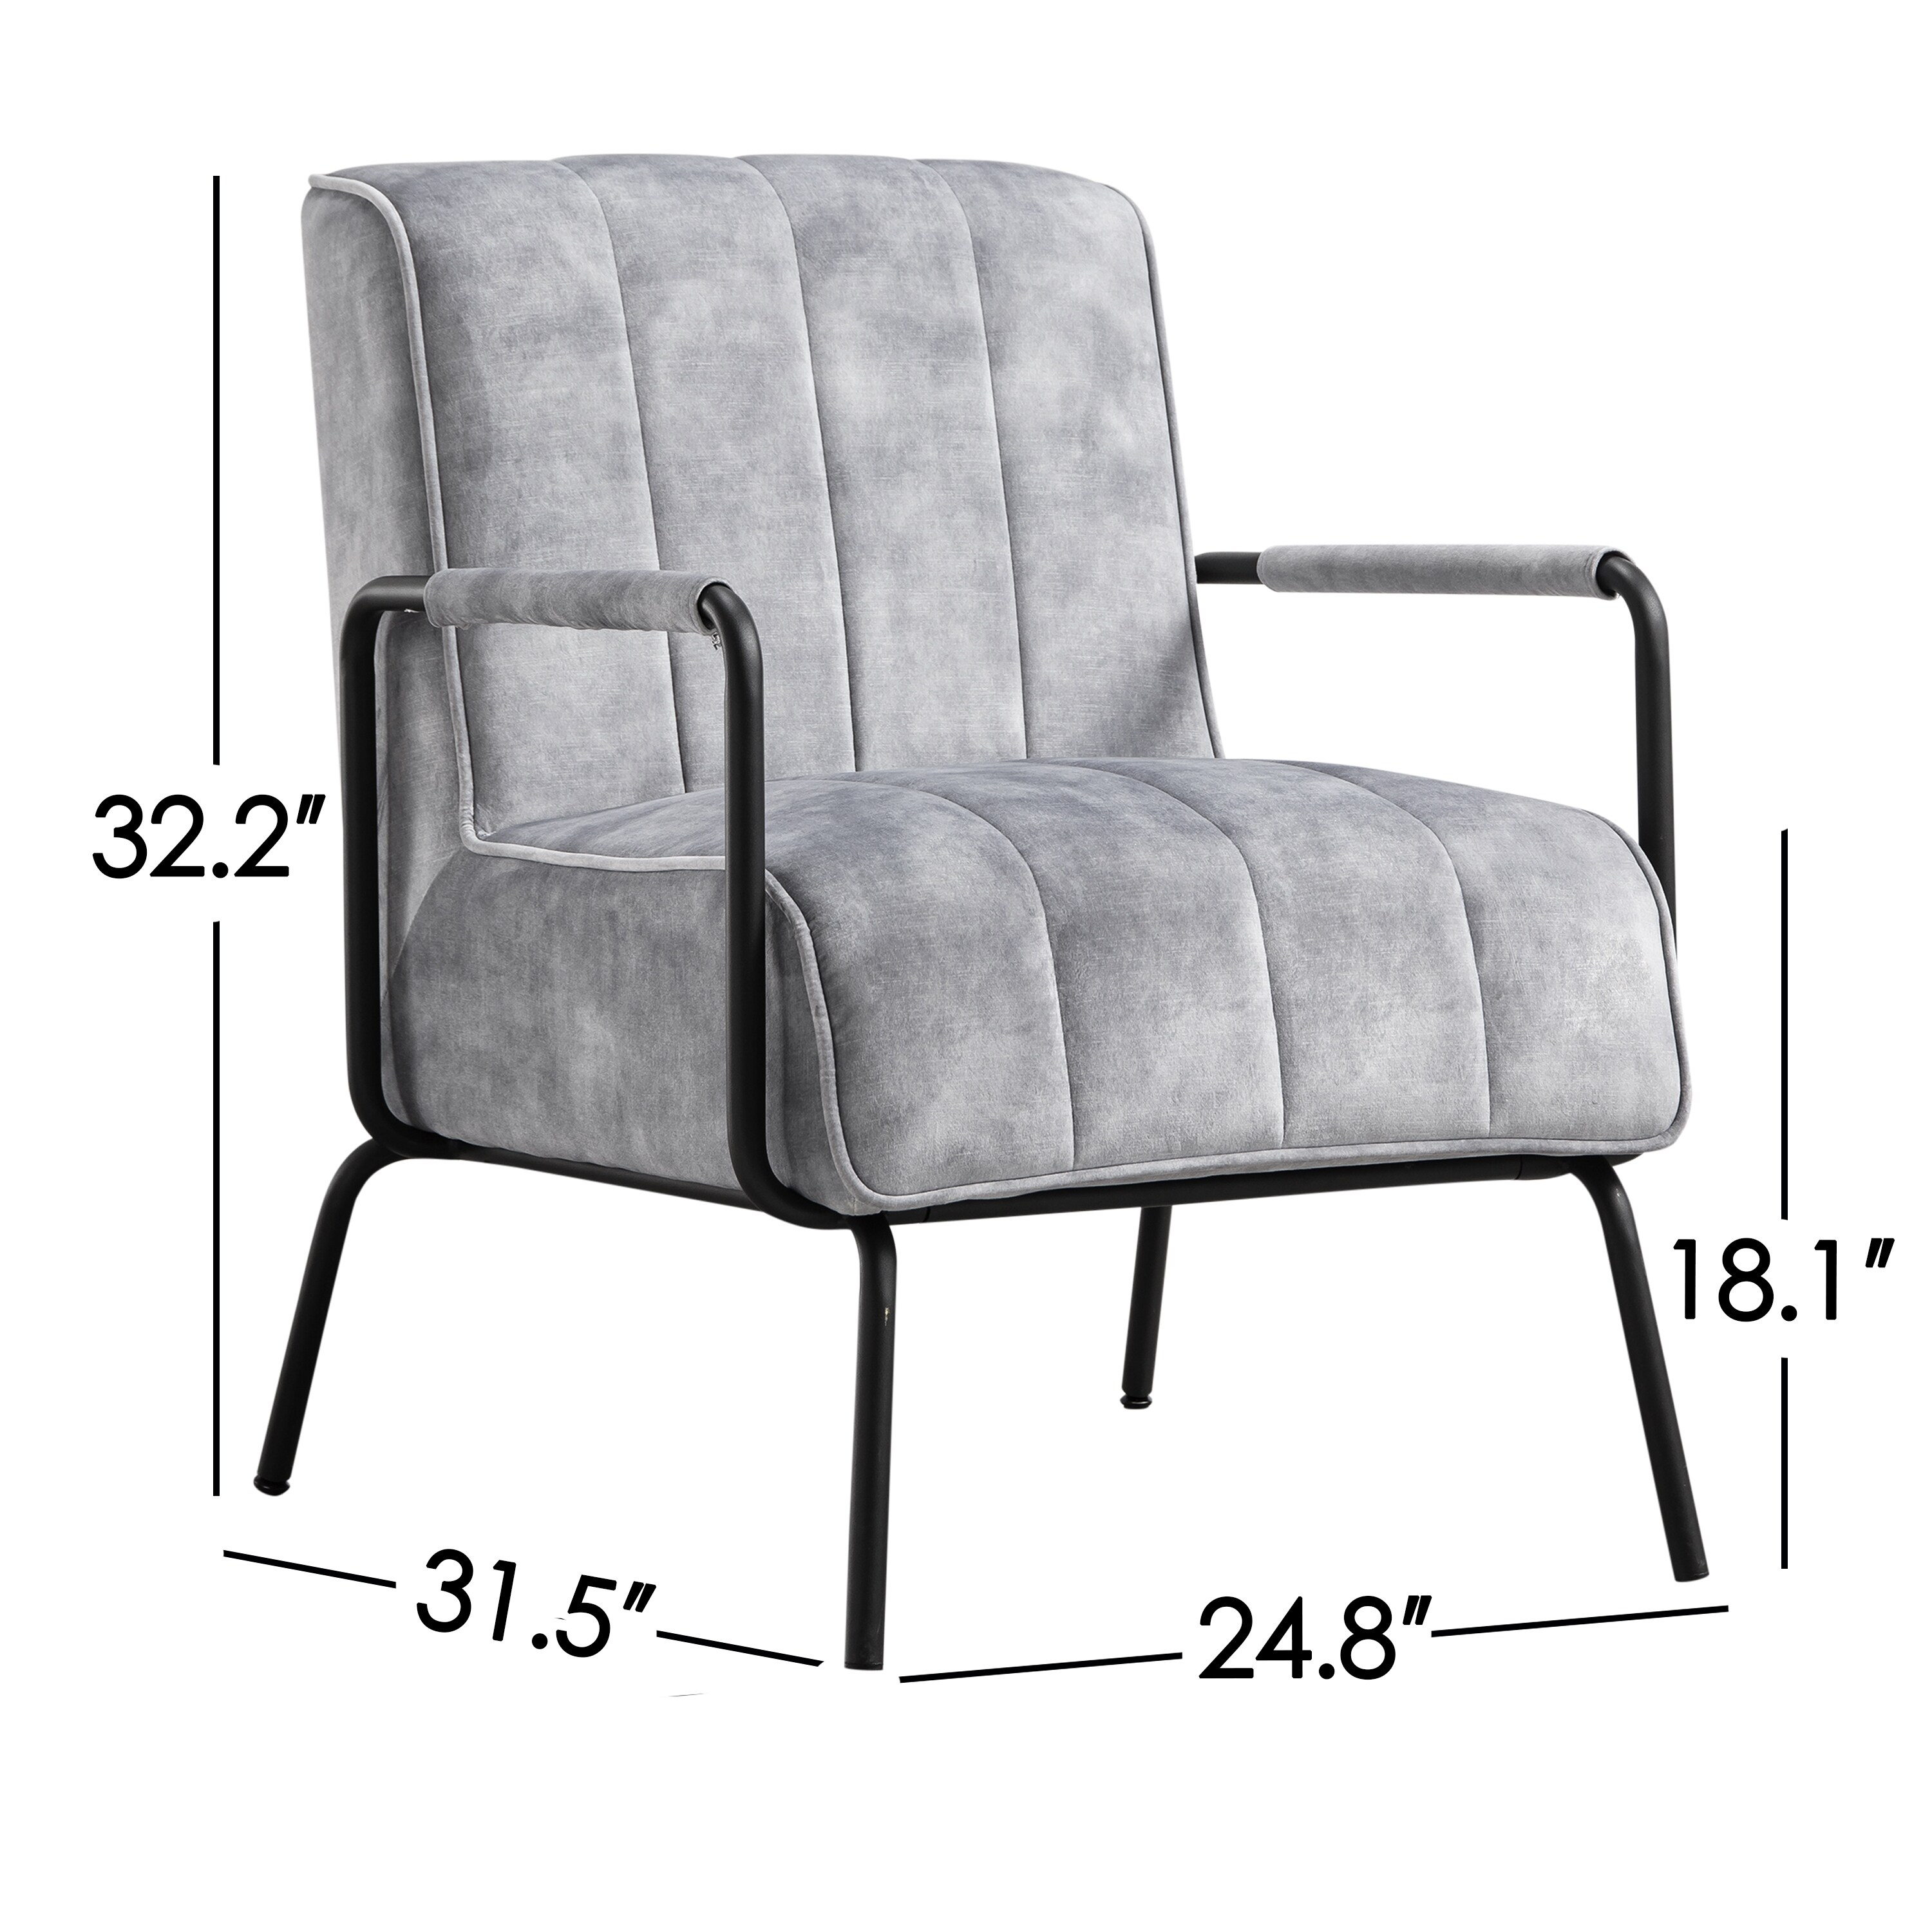 Corvus Zelda Lounge Accent Chair with Arms On Sale - Overstock - 34189780